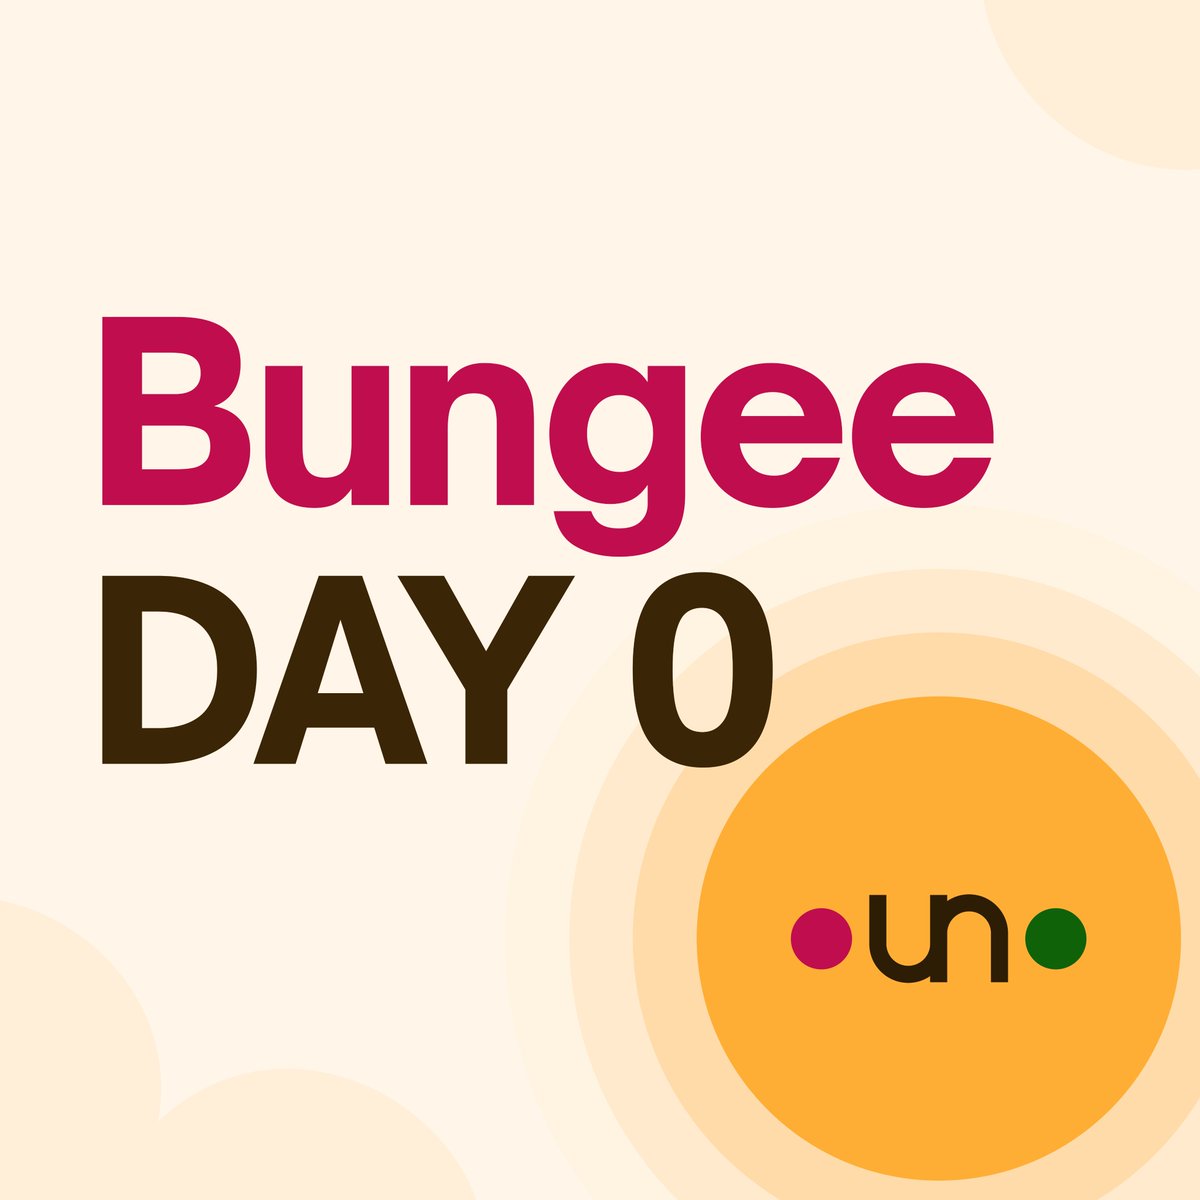 1/ Bungee is GROWING ✨ After processing $10B+ volume & serving 1M+ users, we're opening the Bungee experience to devs to integrate onto any app! Alongside, we're kicking-off the Bungee community as we head into the final phase 🧵